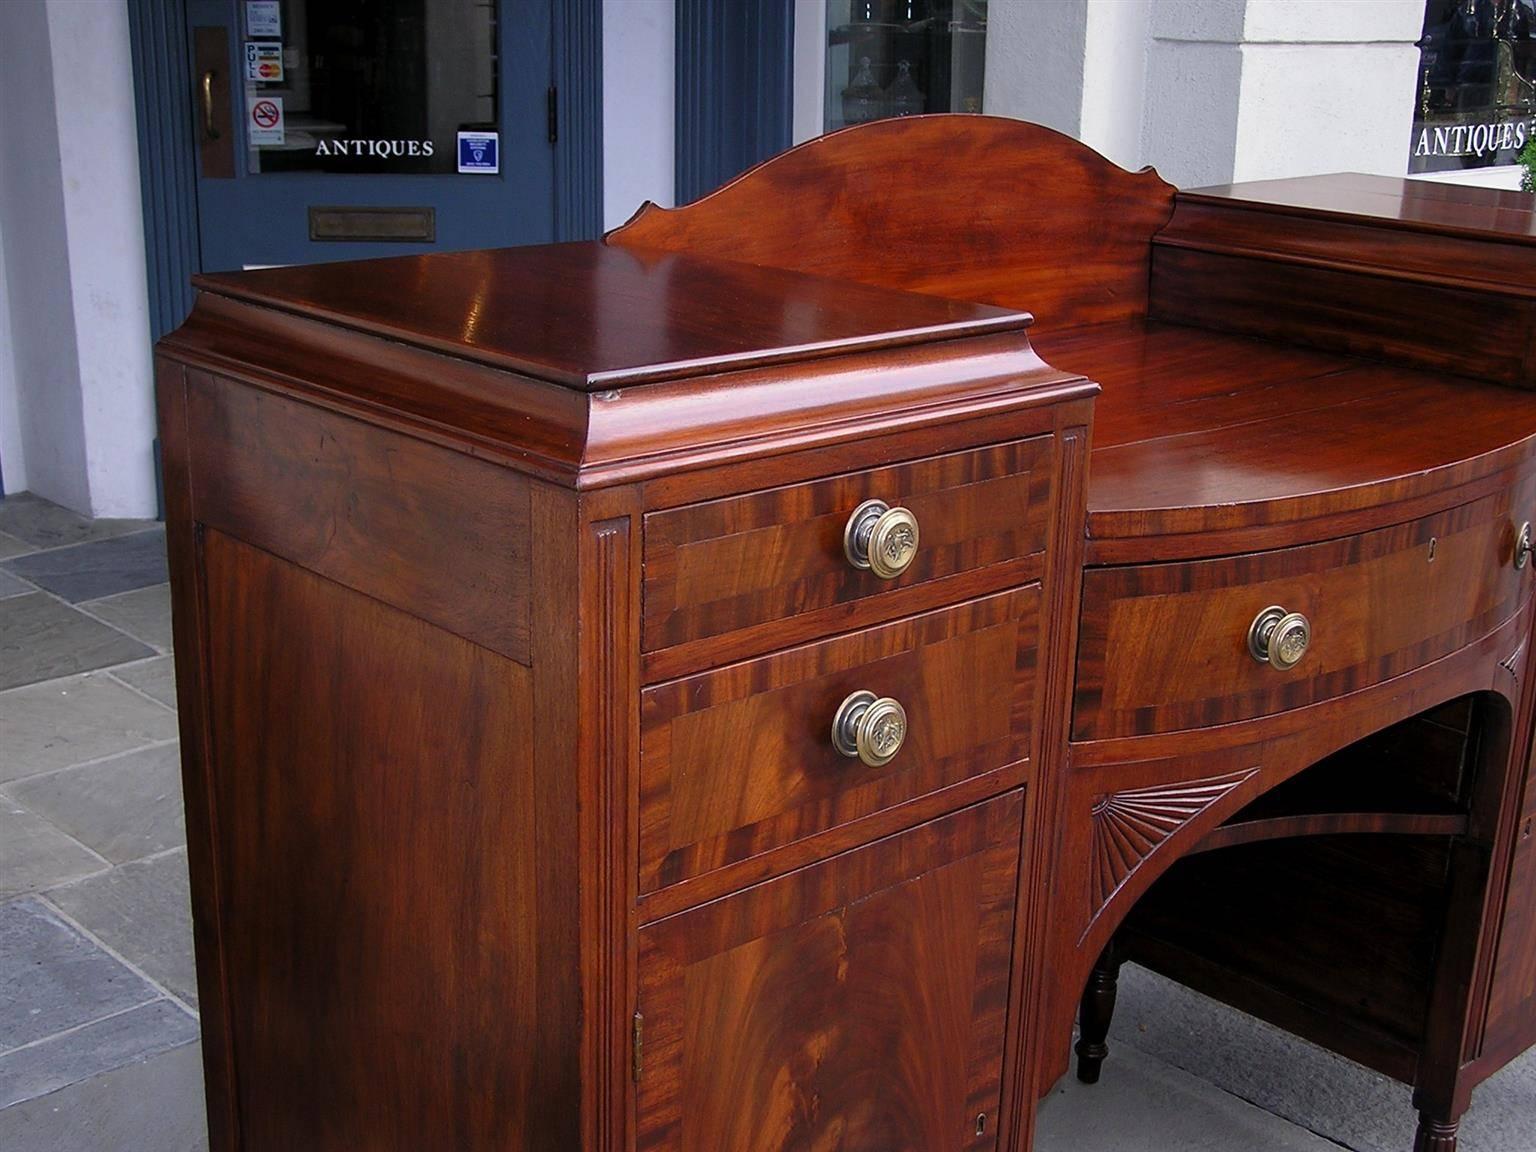 Early 19th Century American Sheraton Mahogany Sideboard with Flanking Cabinets, Circa 1820 For Sale